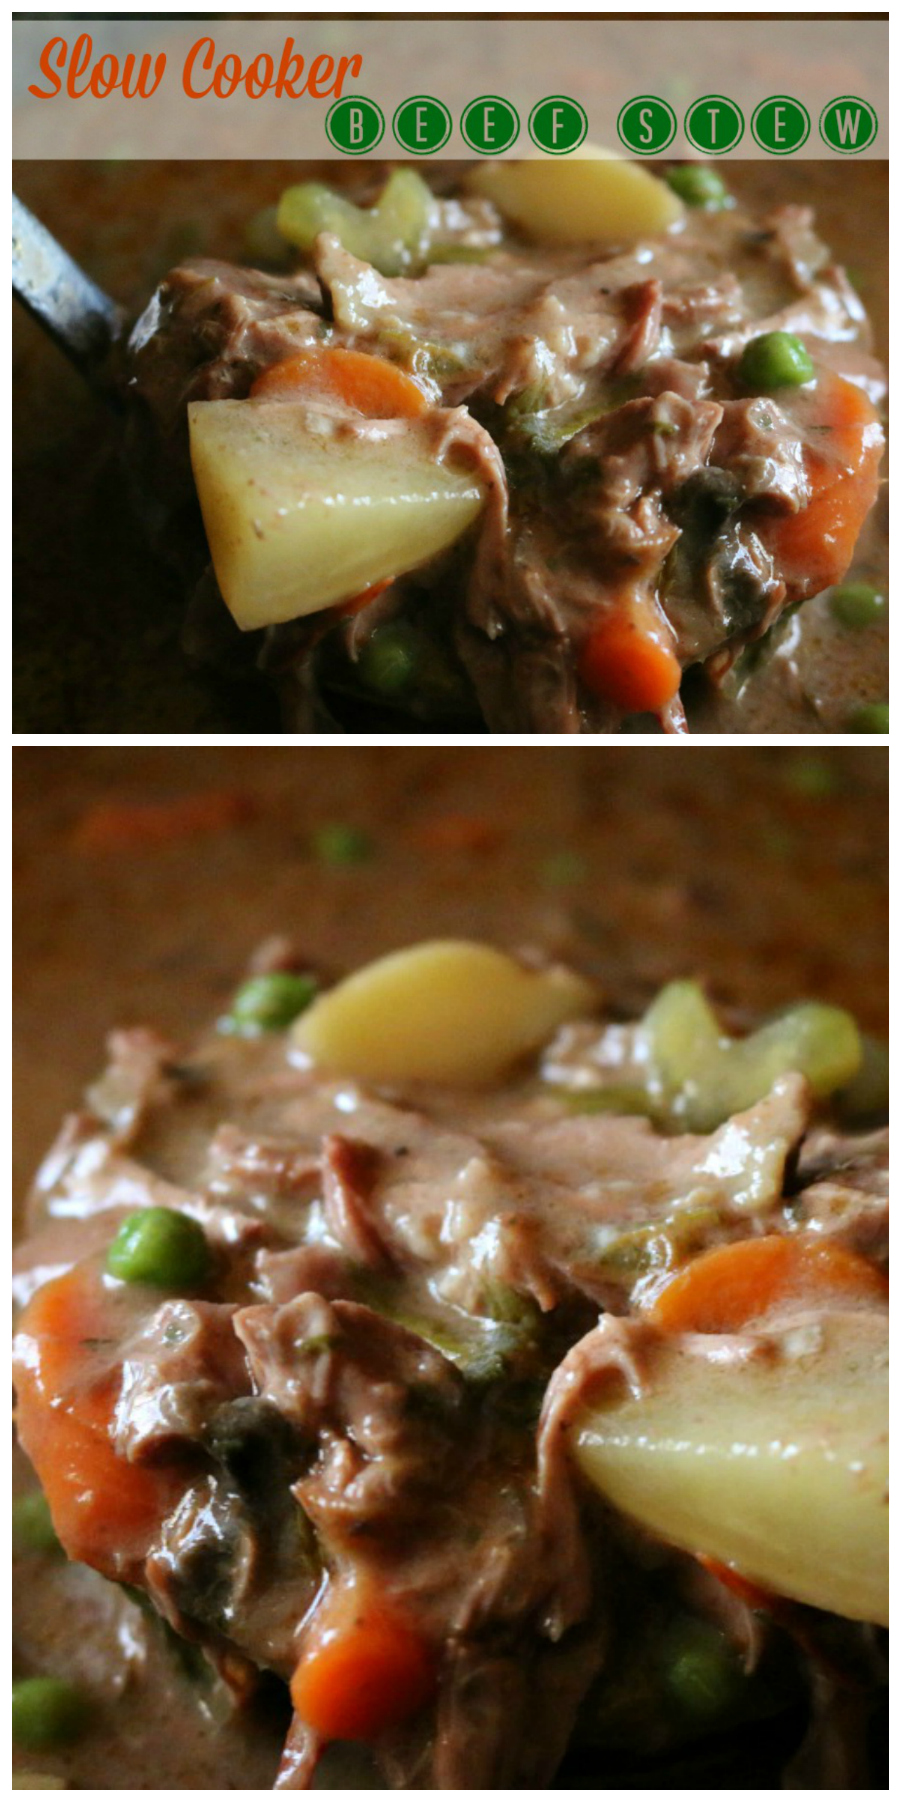 Slow Cooker Beef Stew - Simple and delicious recipe | www.ceceliasgoodstuff.com